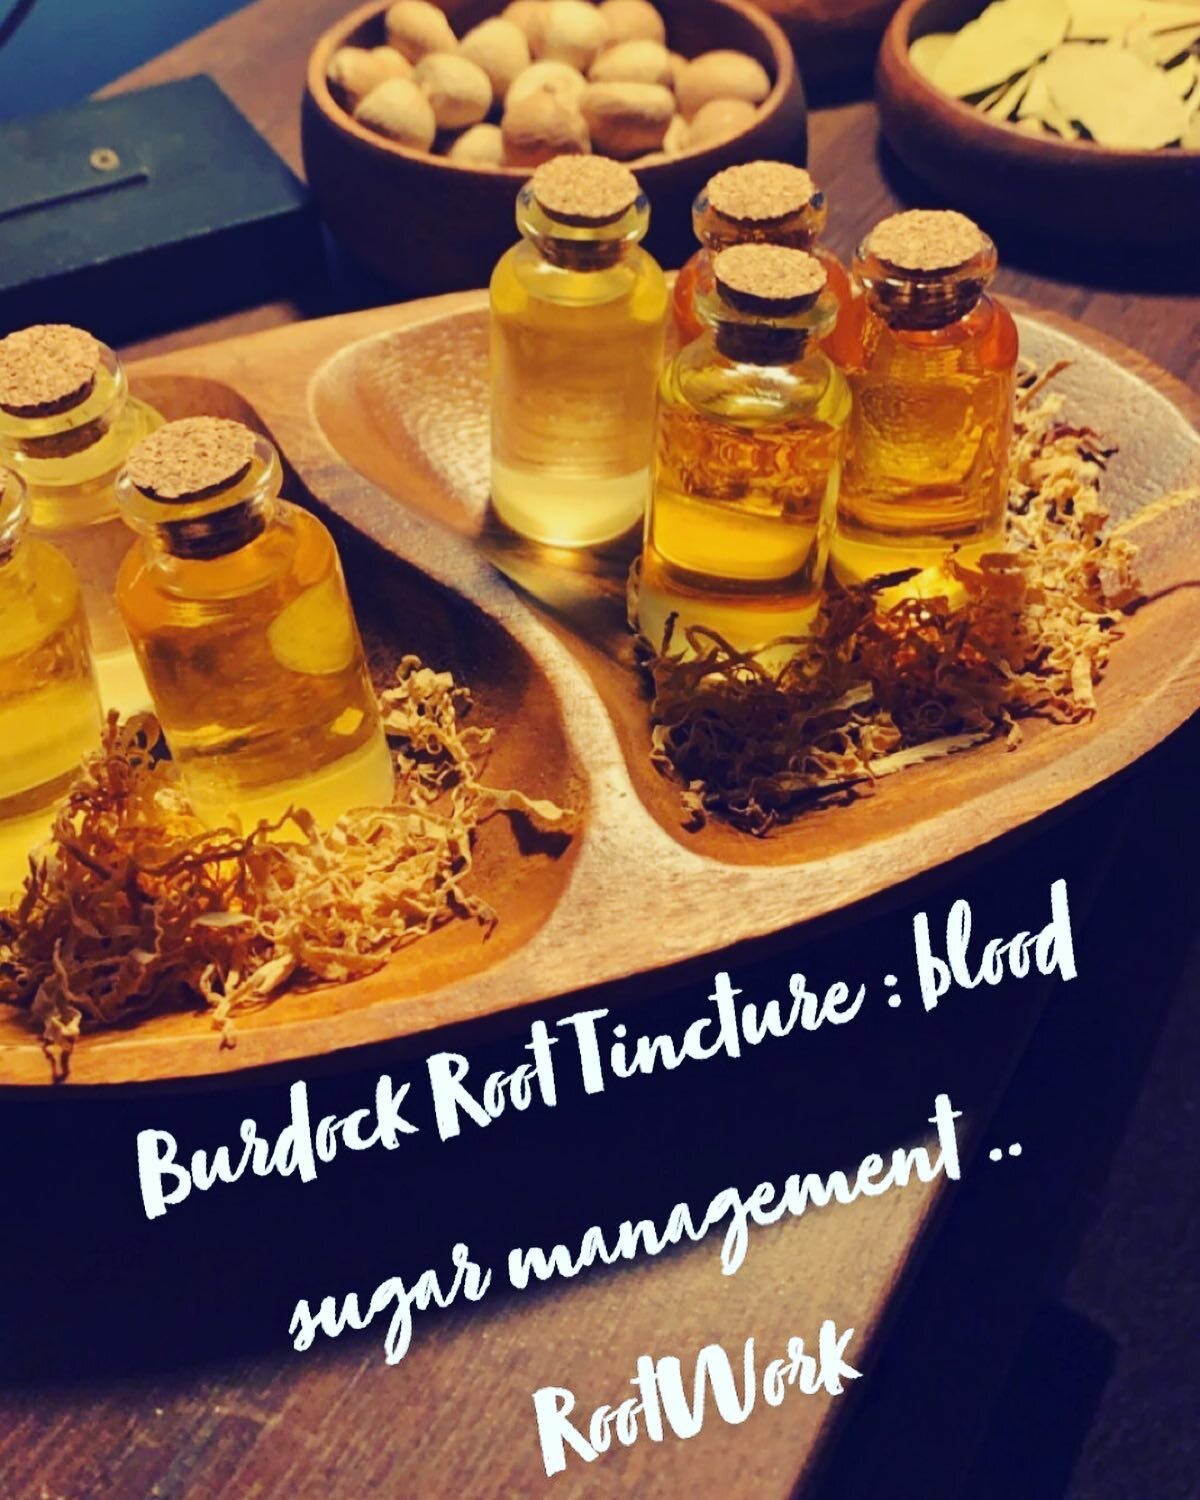 ✨Burdock Root Tincture ✨

Burdock Root have been used for centuries as decoctions or teas for colds, gout, rheumatism, stomach ailments, and cancer, as well as used to promote urination, increase sweating, and facilitate bowel movements. It's also be